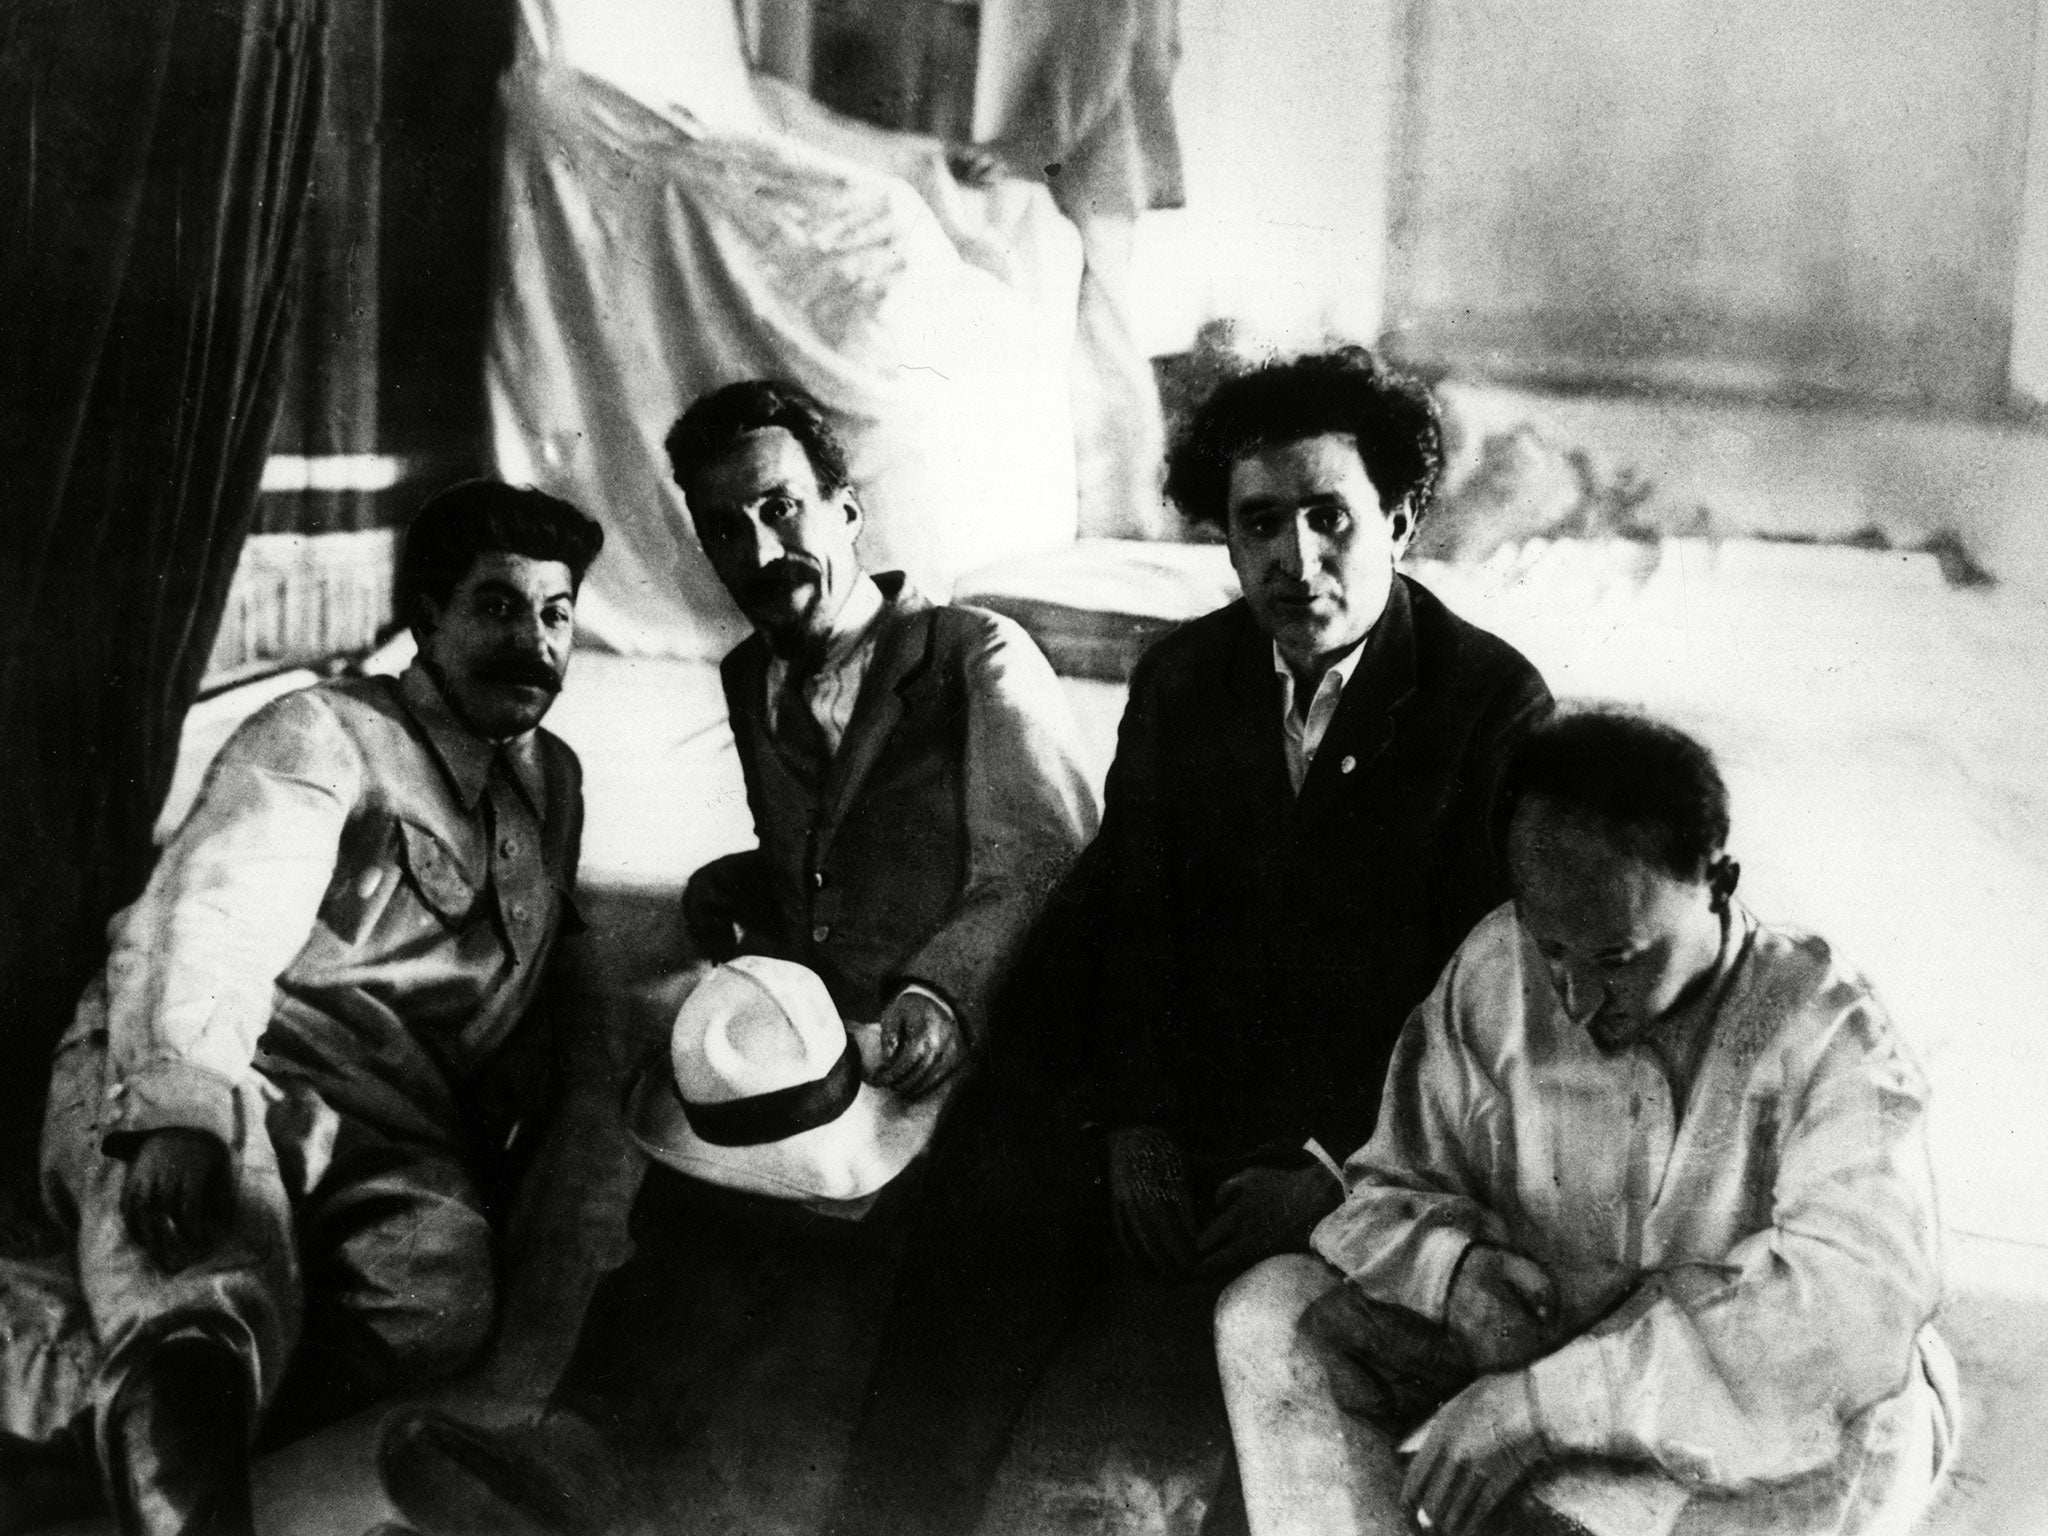 From left: Josef Stalin in 1930 with Alexei Rykov, chairman of the Council of People’s Commissars of the Soviet Union, and Grigory Zinoviev, head of the Communist International, and an unidentified man